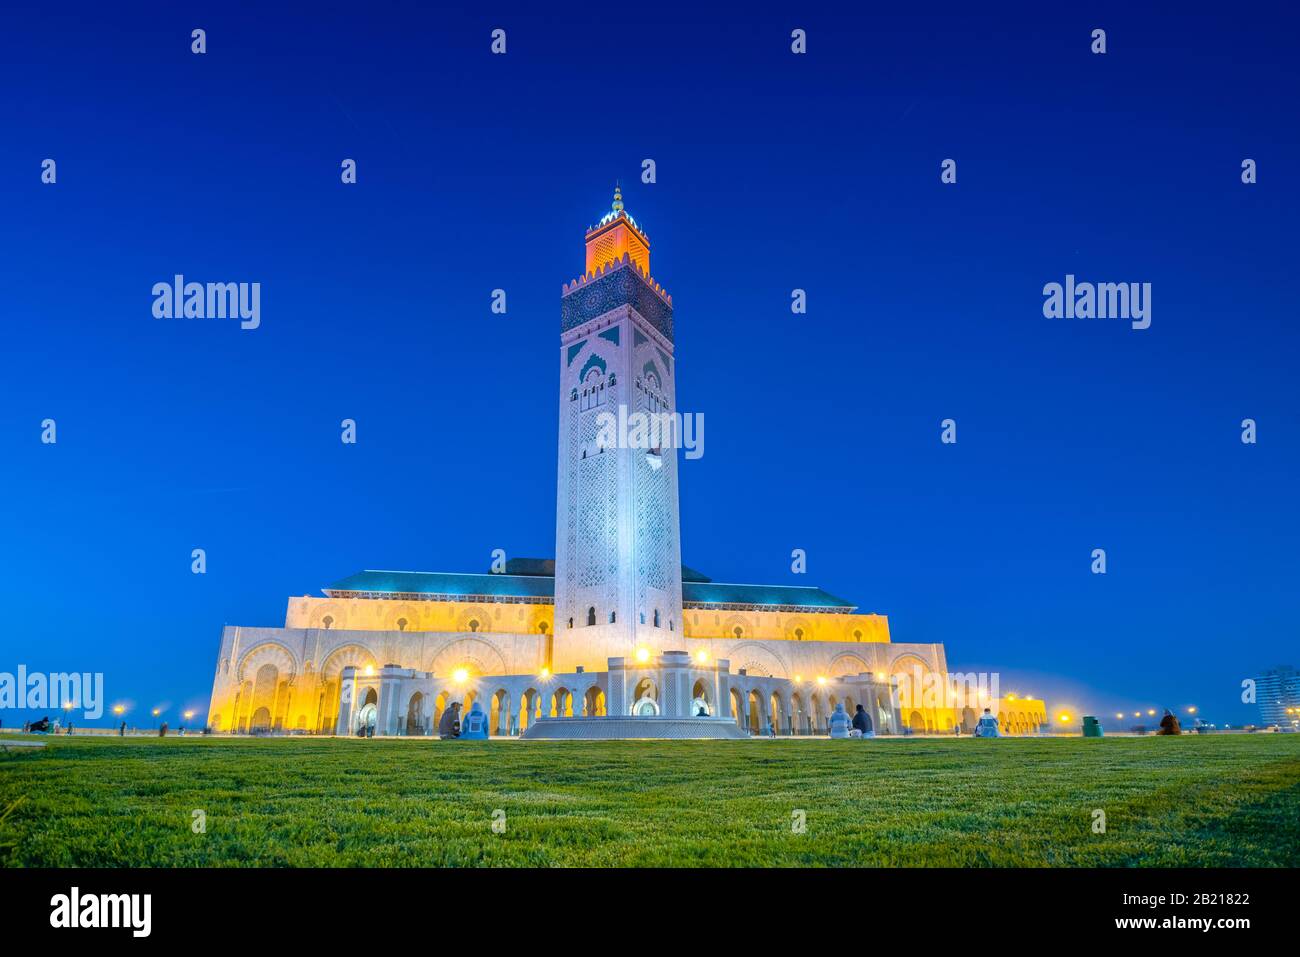 The Hassan II Mosque is a mosque in Casablanca, Morocco. It is the largest mosque in Morocco with the tallest minaret in the world. Stock Photo